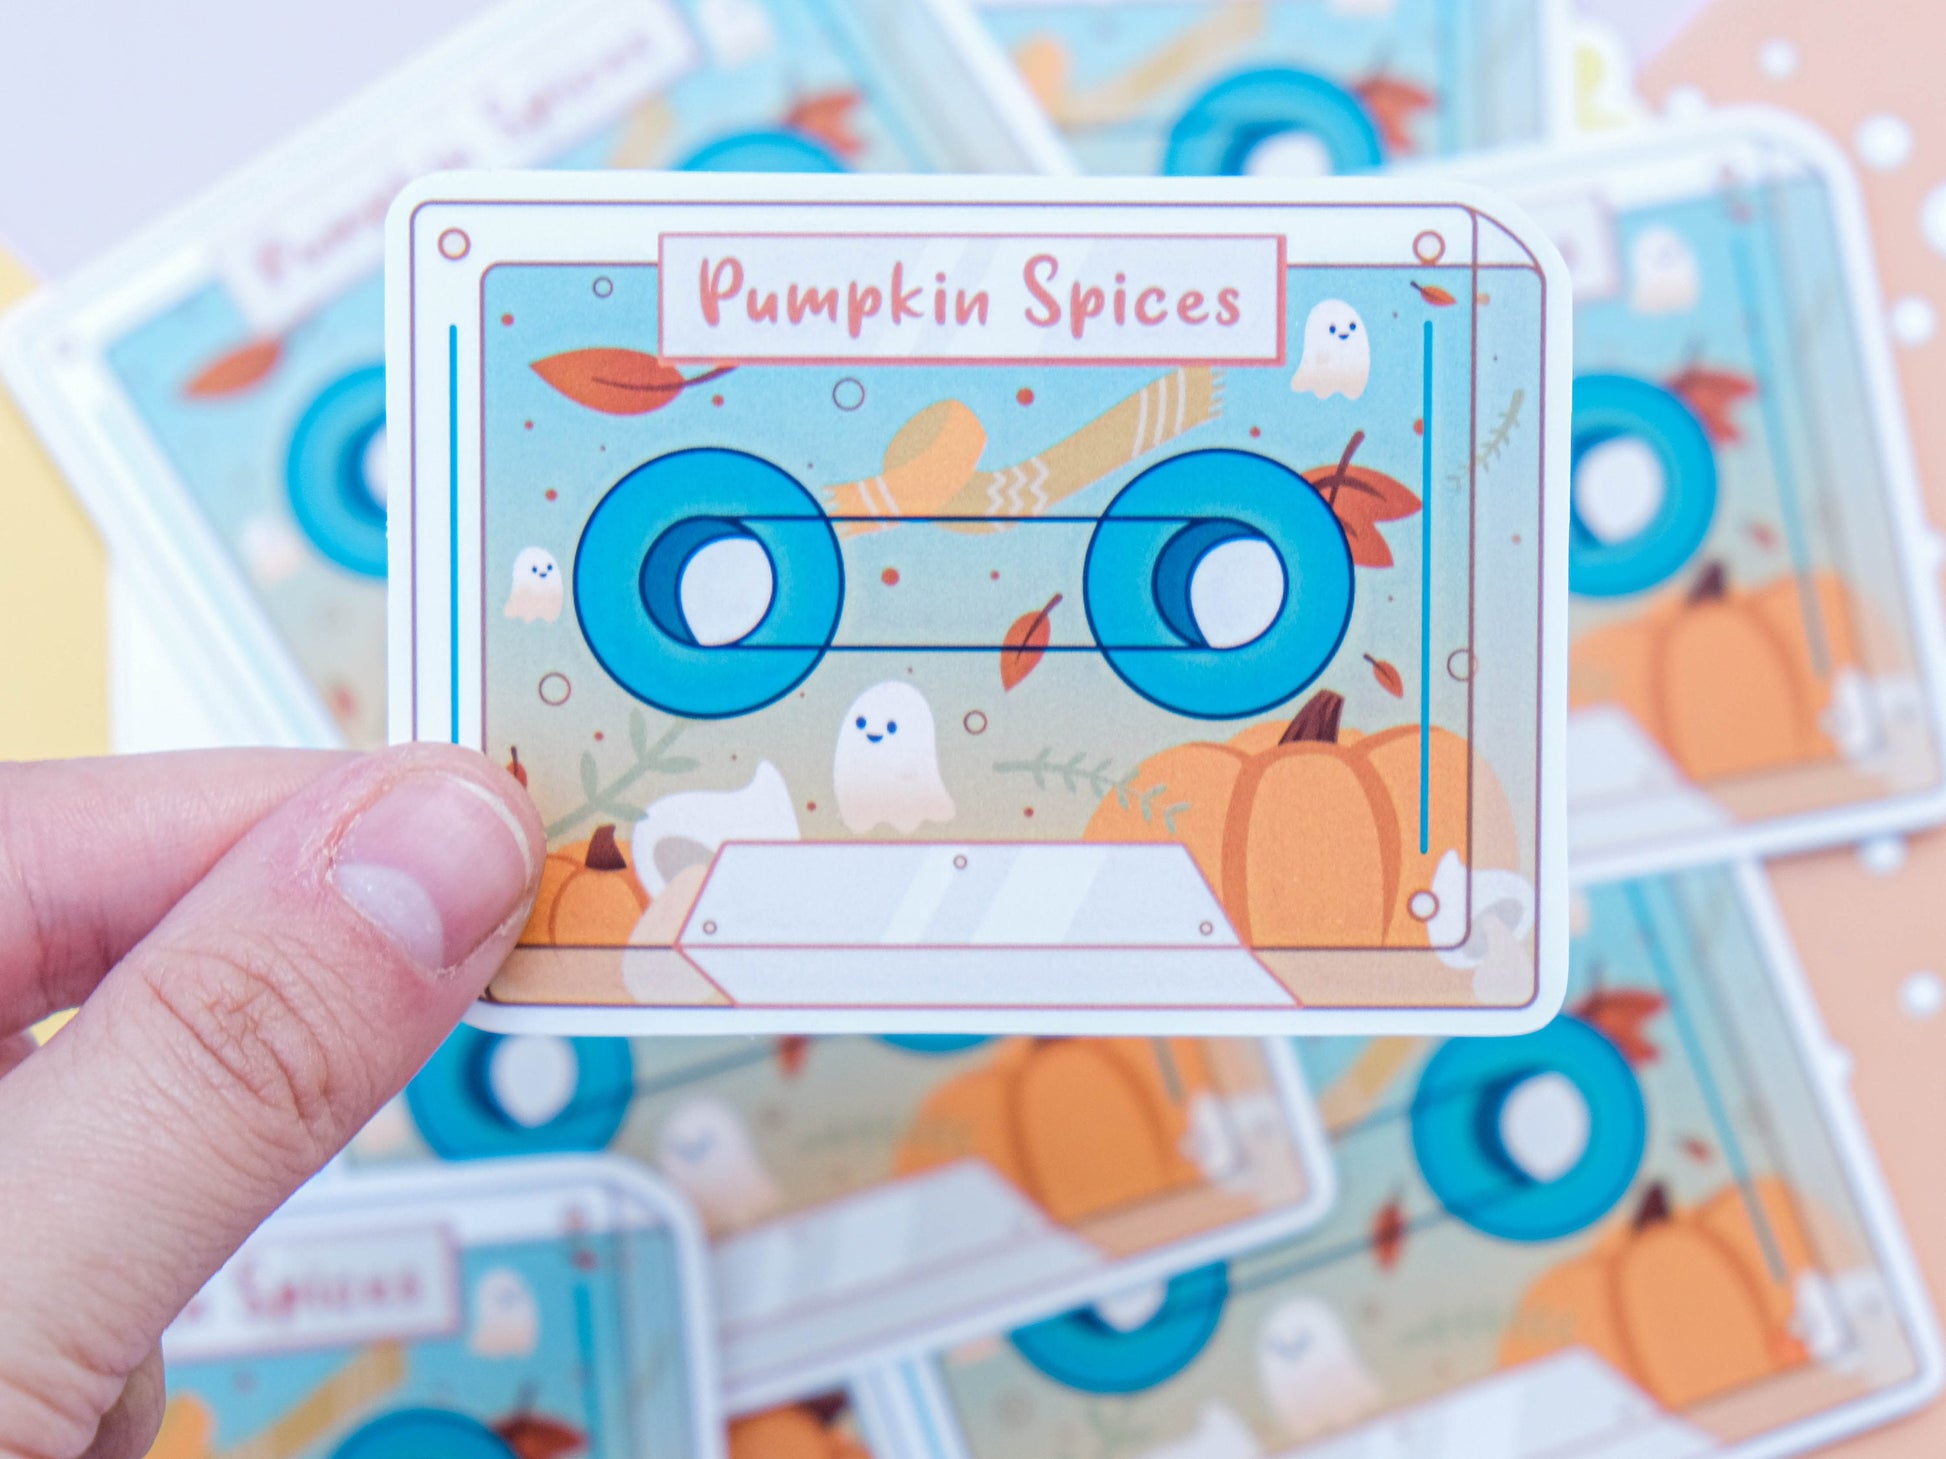 Mix Tape Sticker - Cute Sticker for Bullet Journal - Retro and Vintage Sticker - Fall season and Halloween Sticker